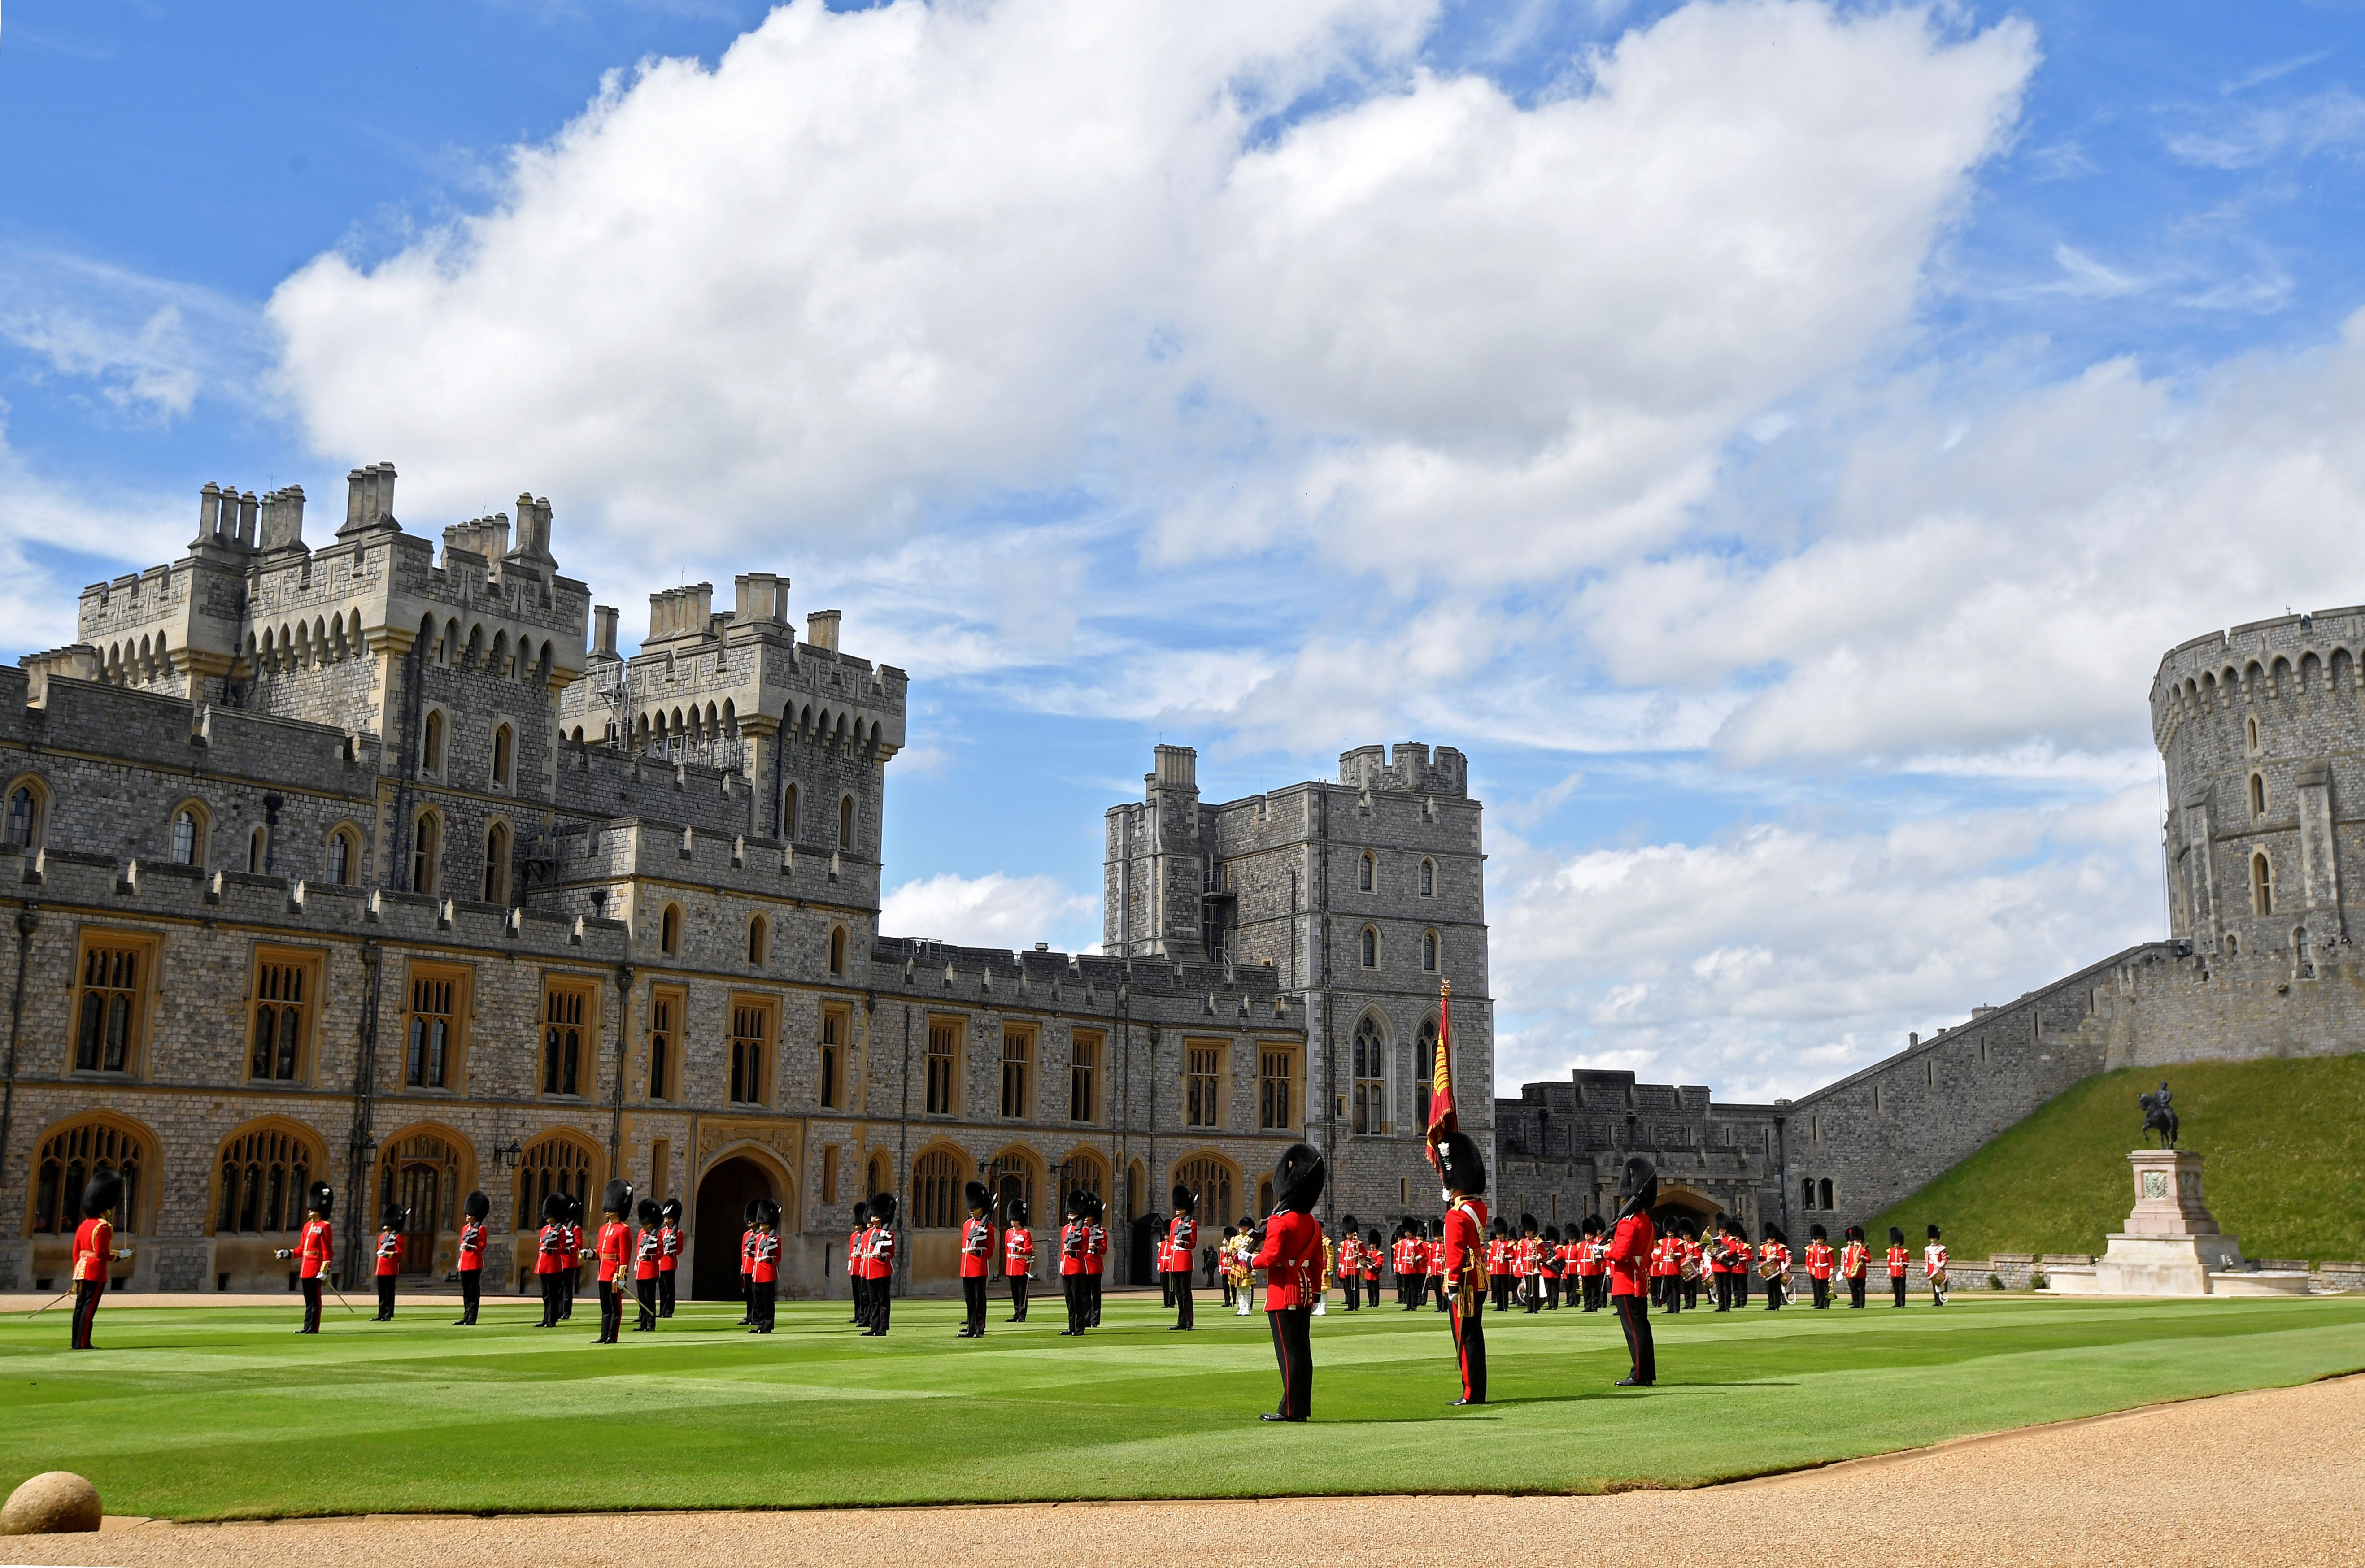 Guardsmen keeping social distance as they stand in formation during Trooping the Colour at Windsor Castle in Windsor, England | Photo: Toby Melville - WPA Pool/Getty Images